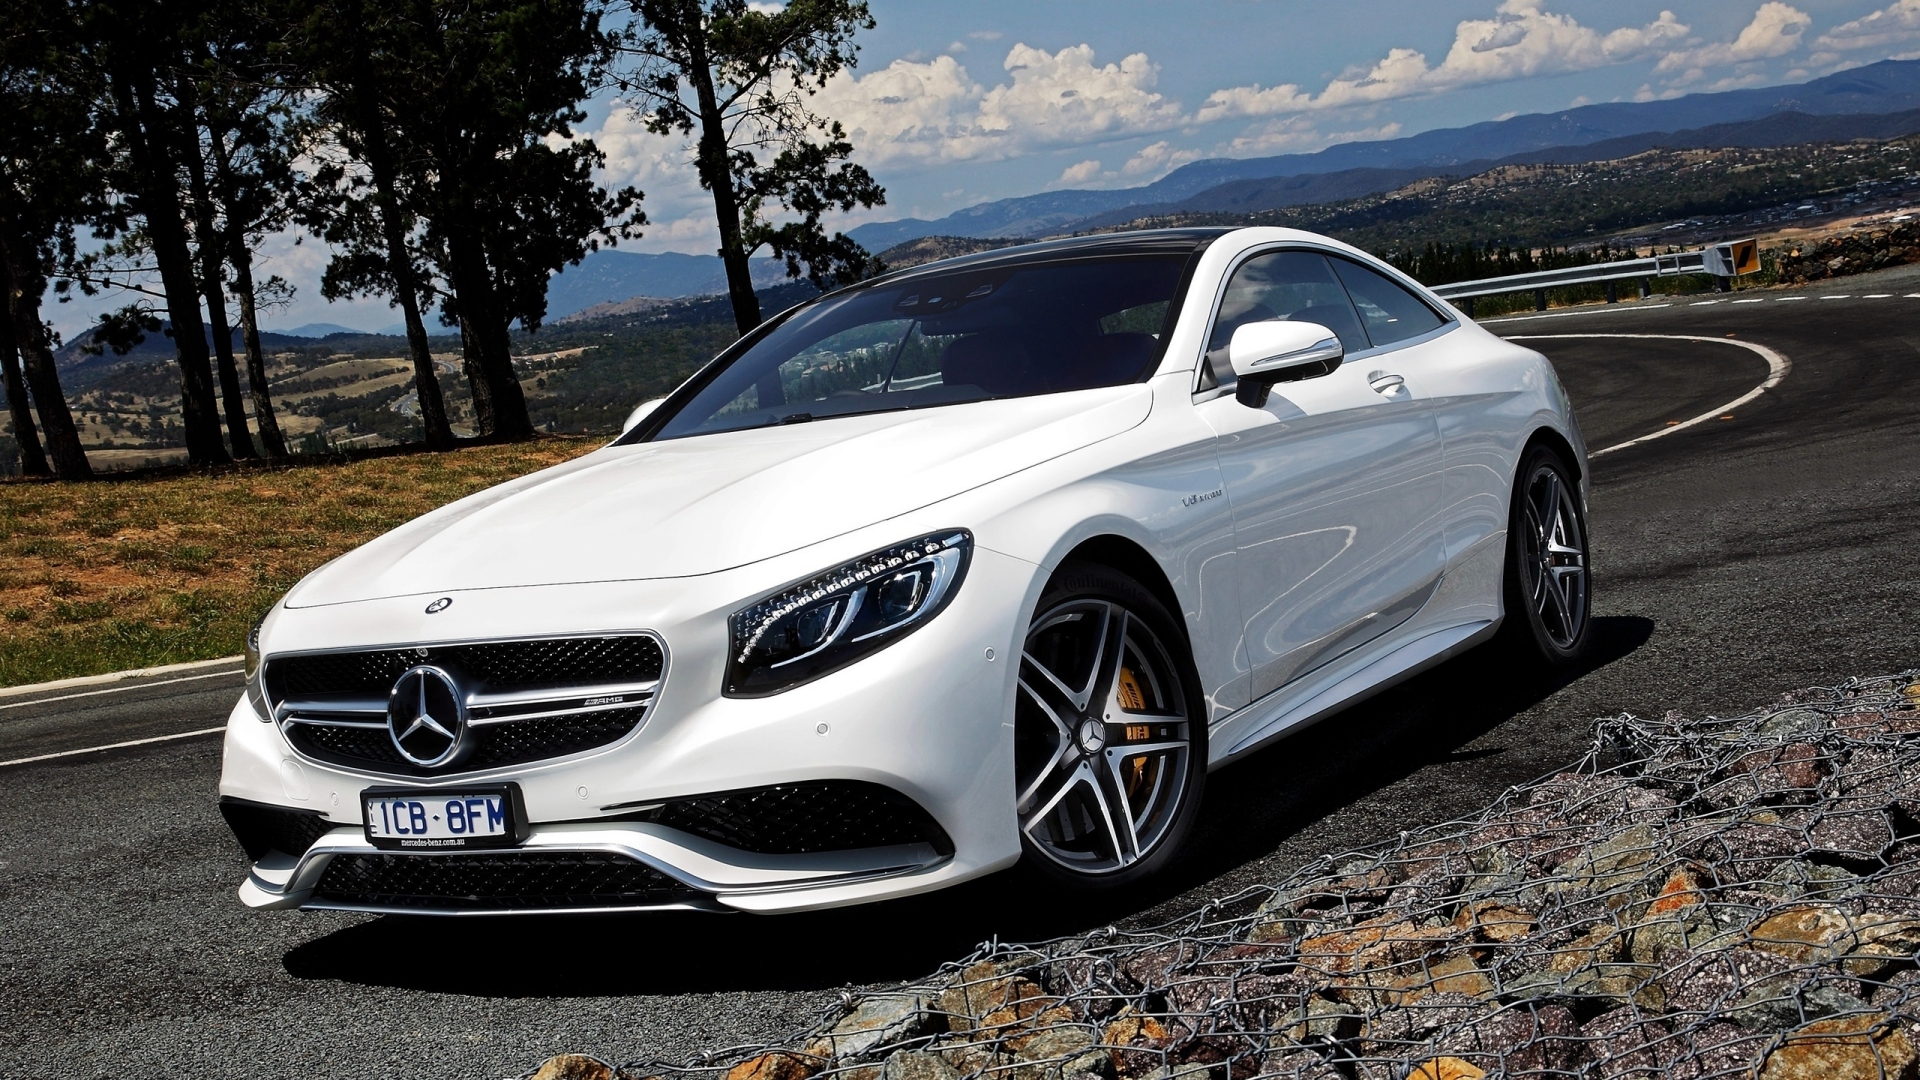 Mercedes Benz S63 AMG for 1920 x 1080 HDTV 1080p resolution